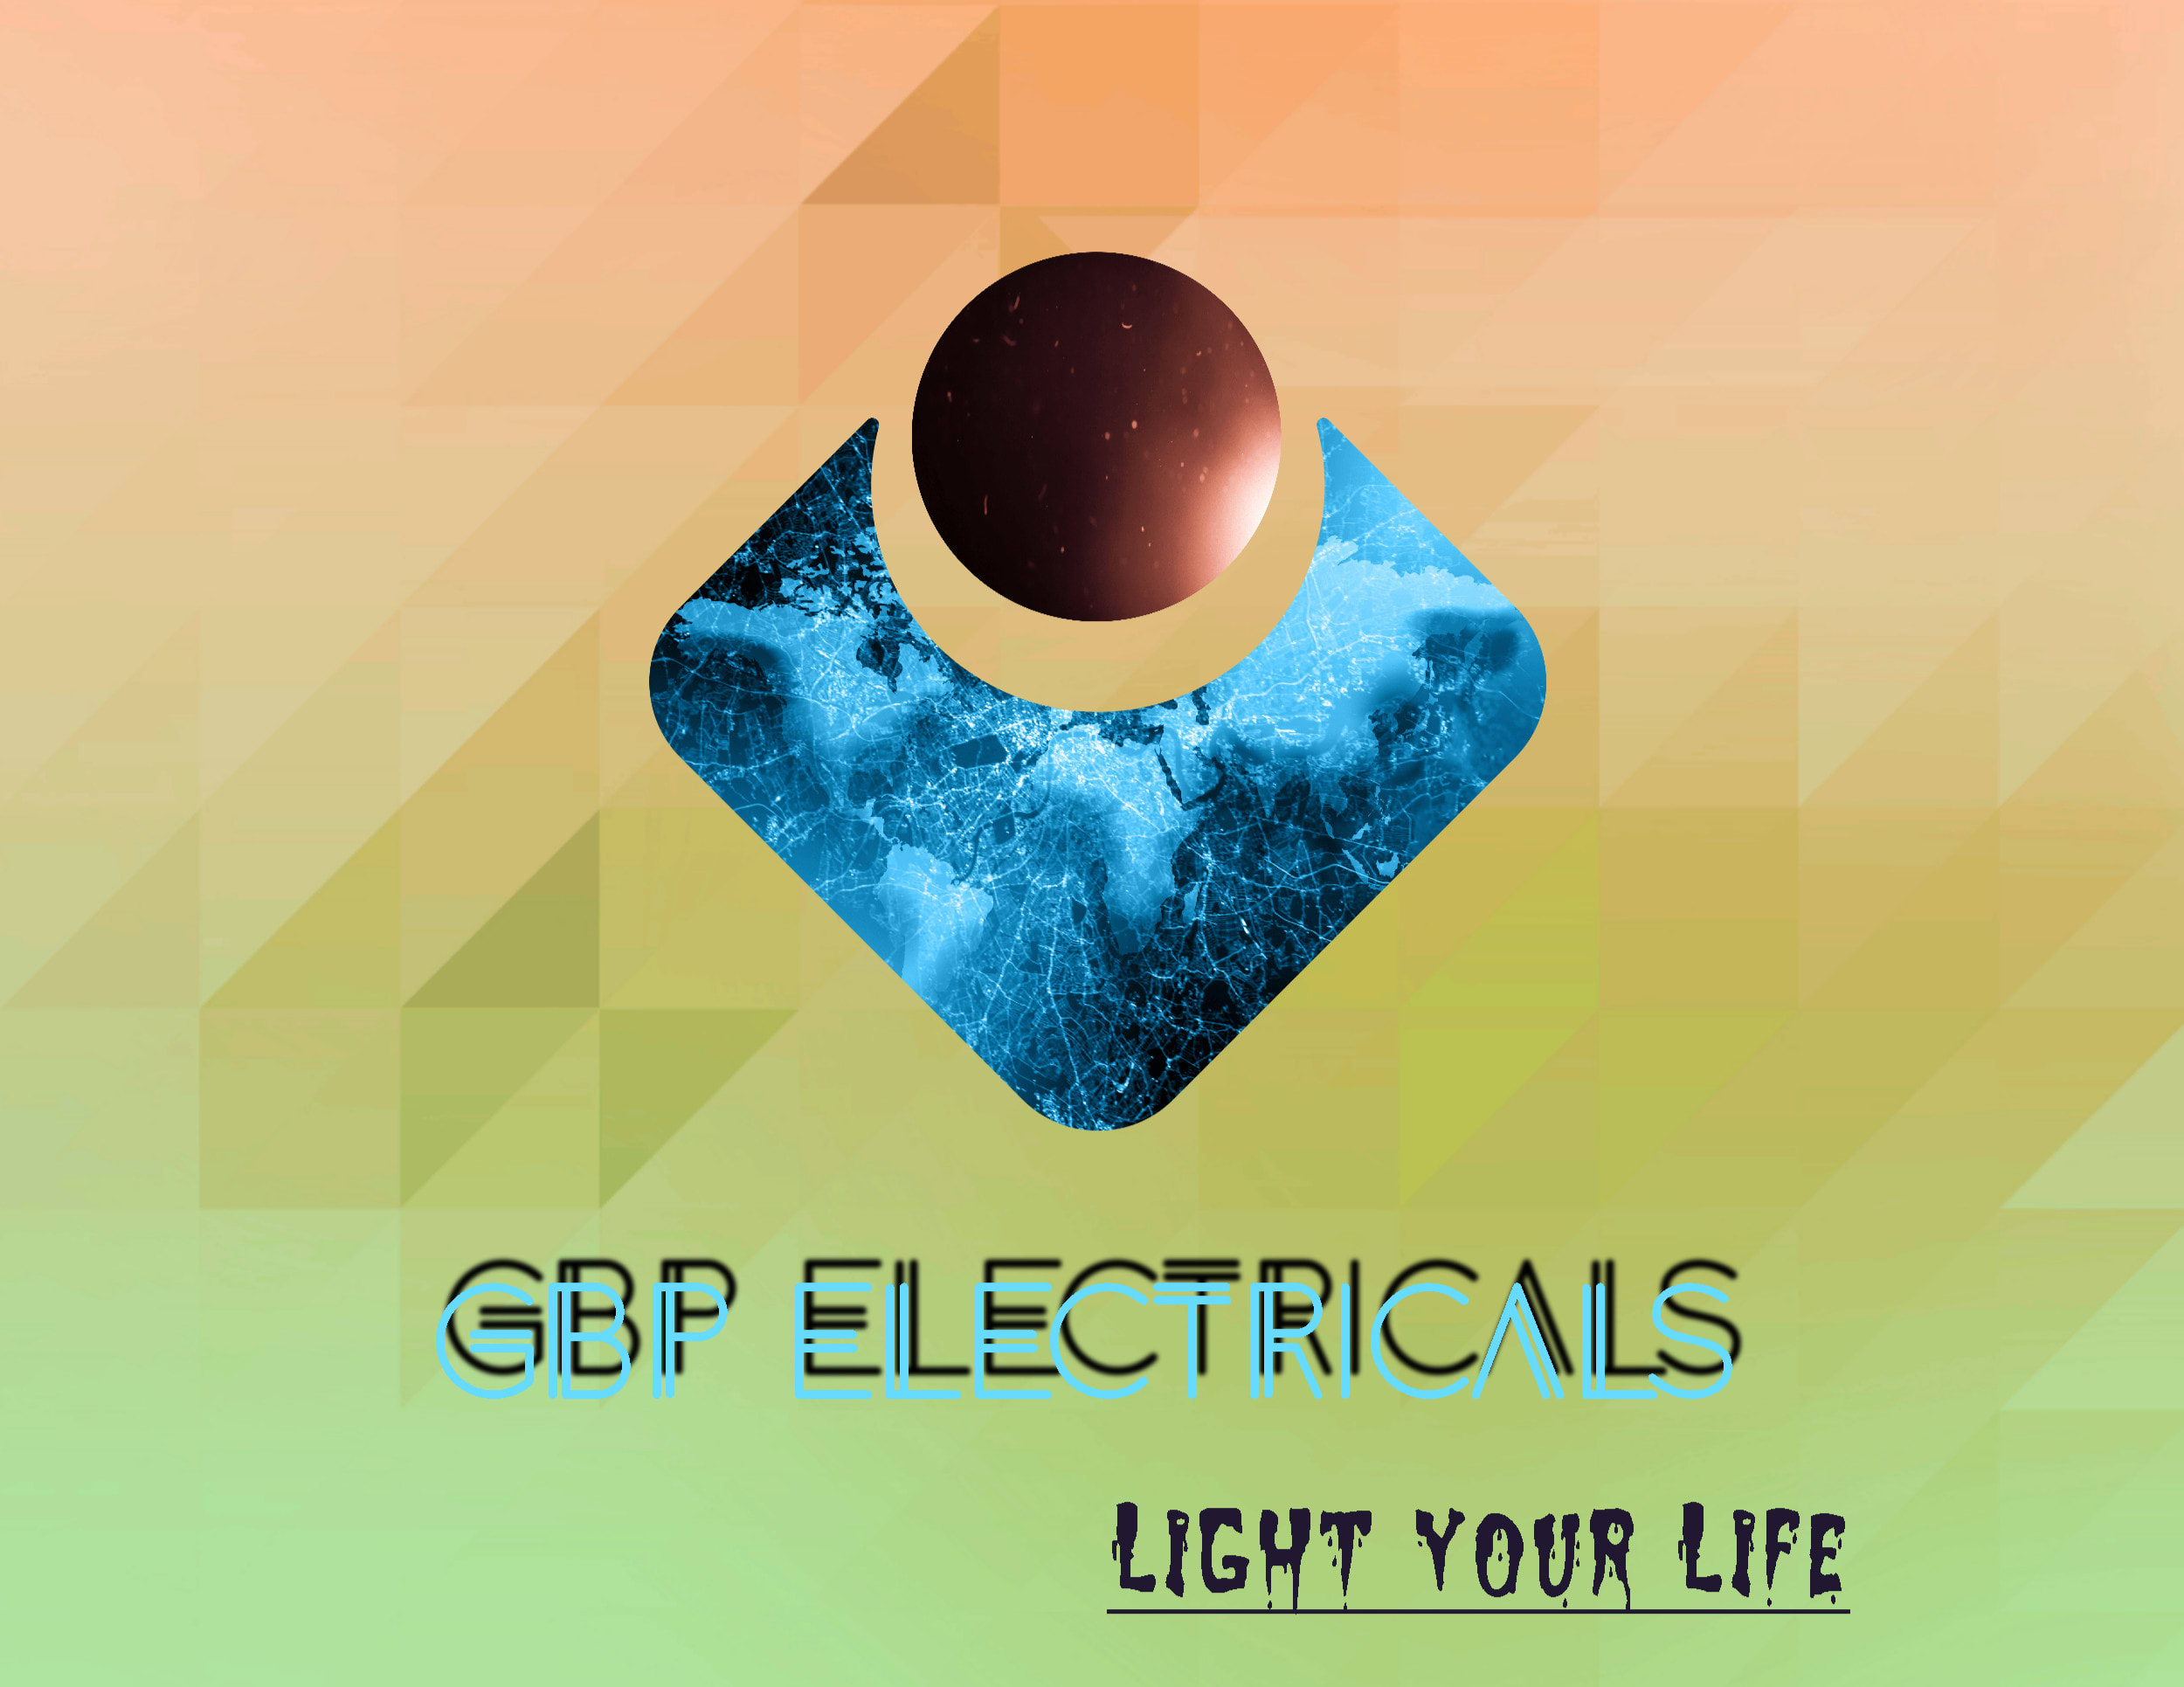 GBP Electricals